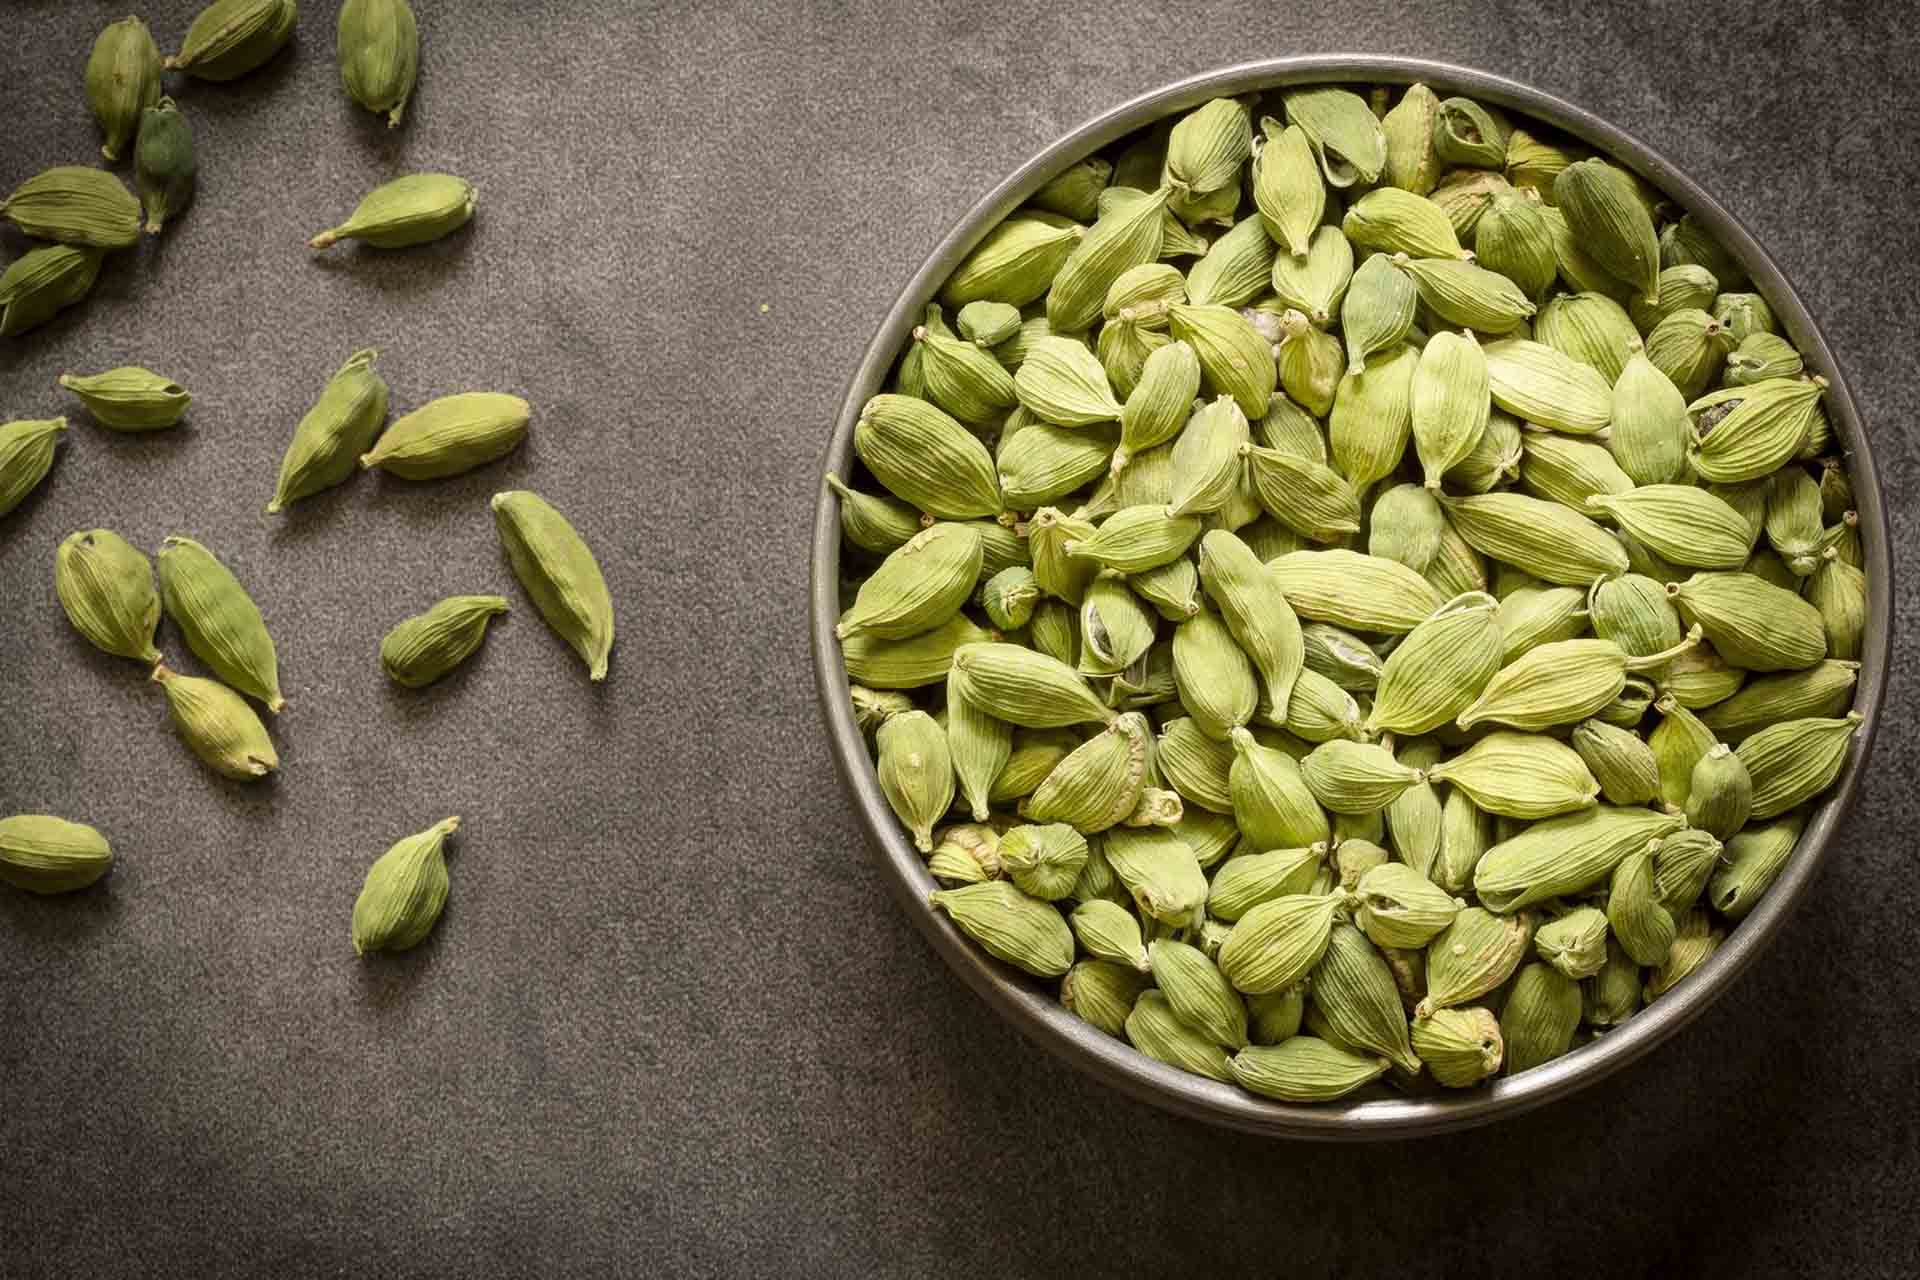 Green cardamom pods in steel bowl with wooden background.